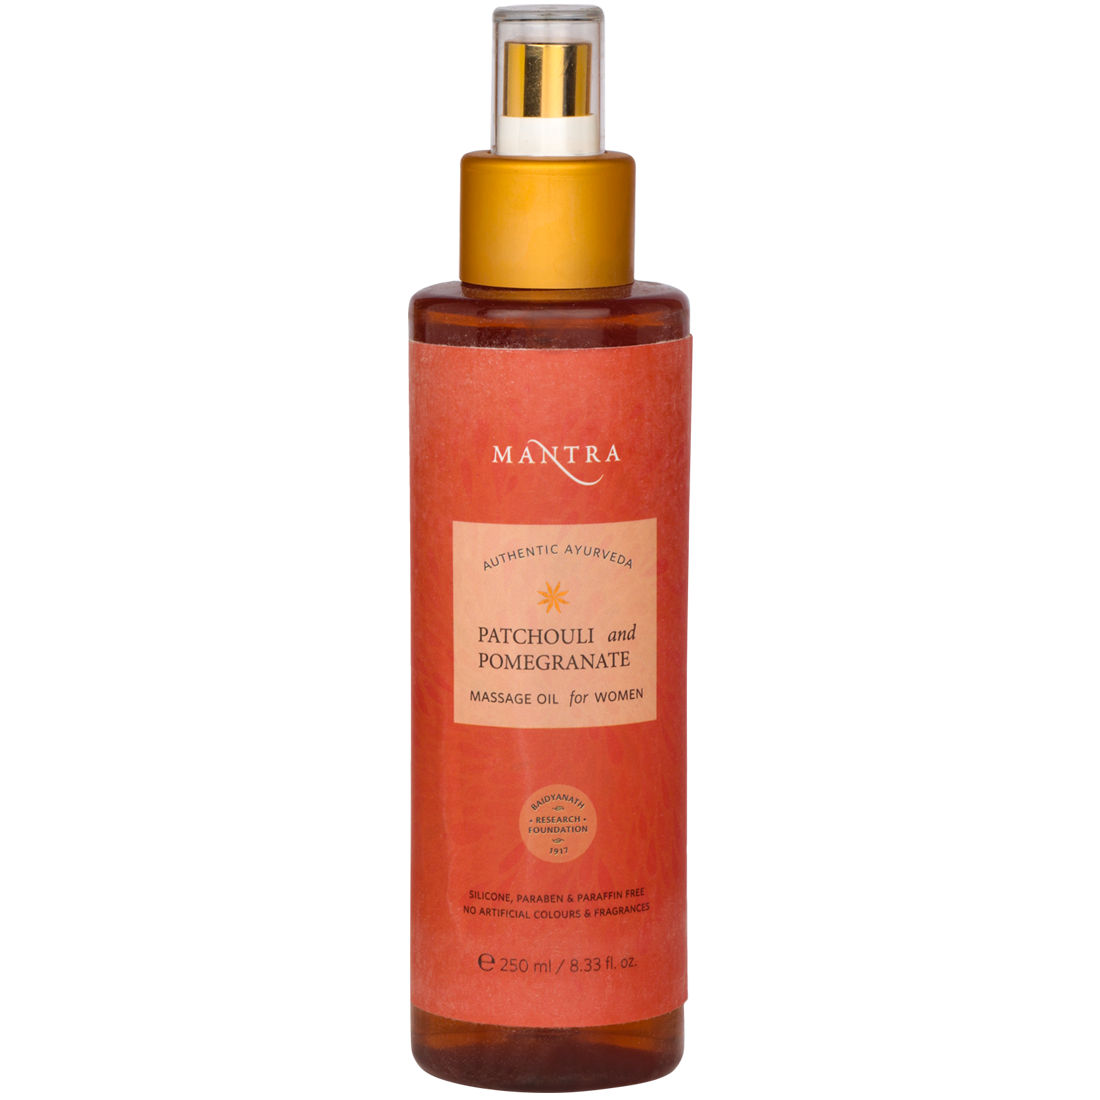 Mantra Herbal Patchouli And Pomegranate Massage Oil For Women